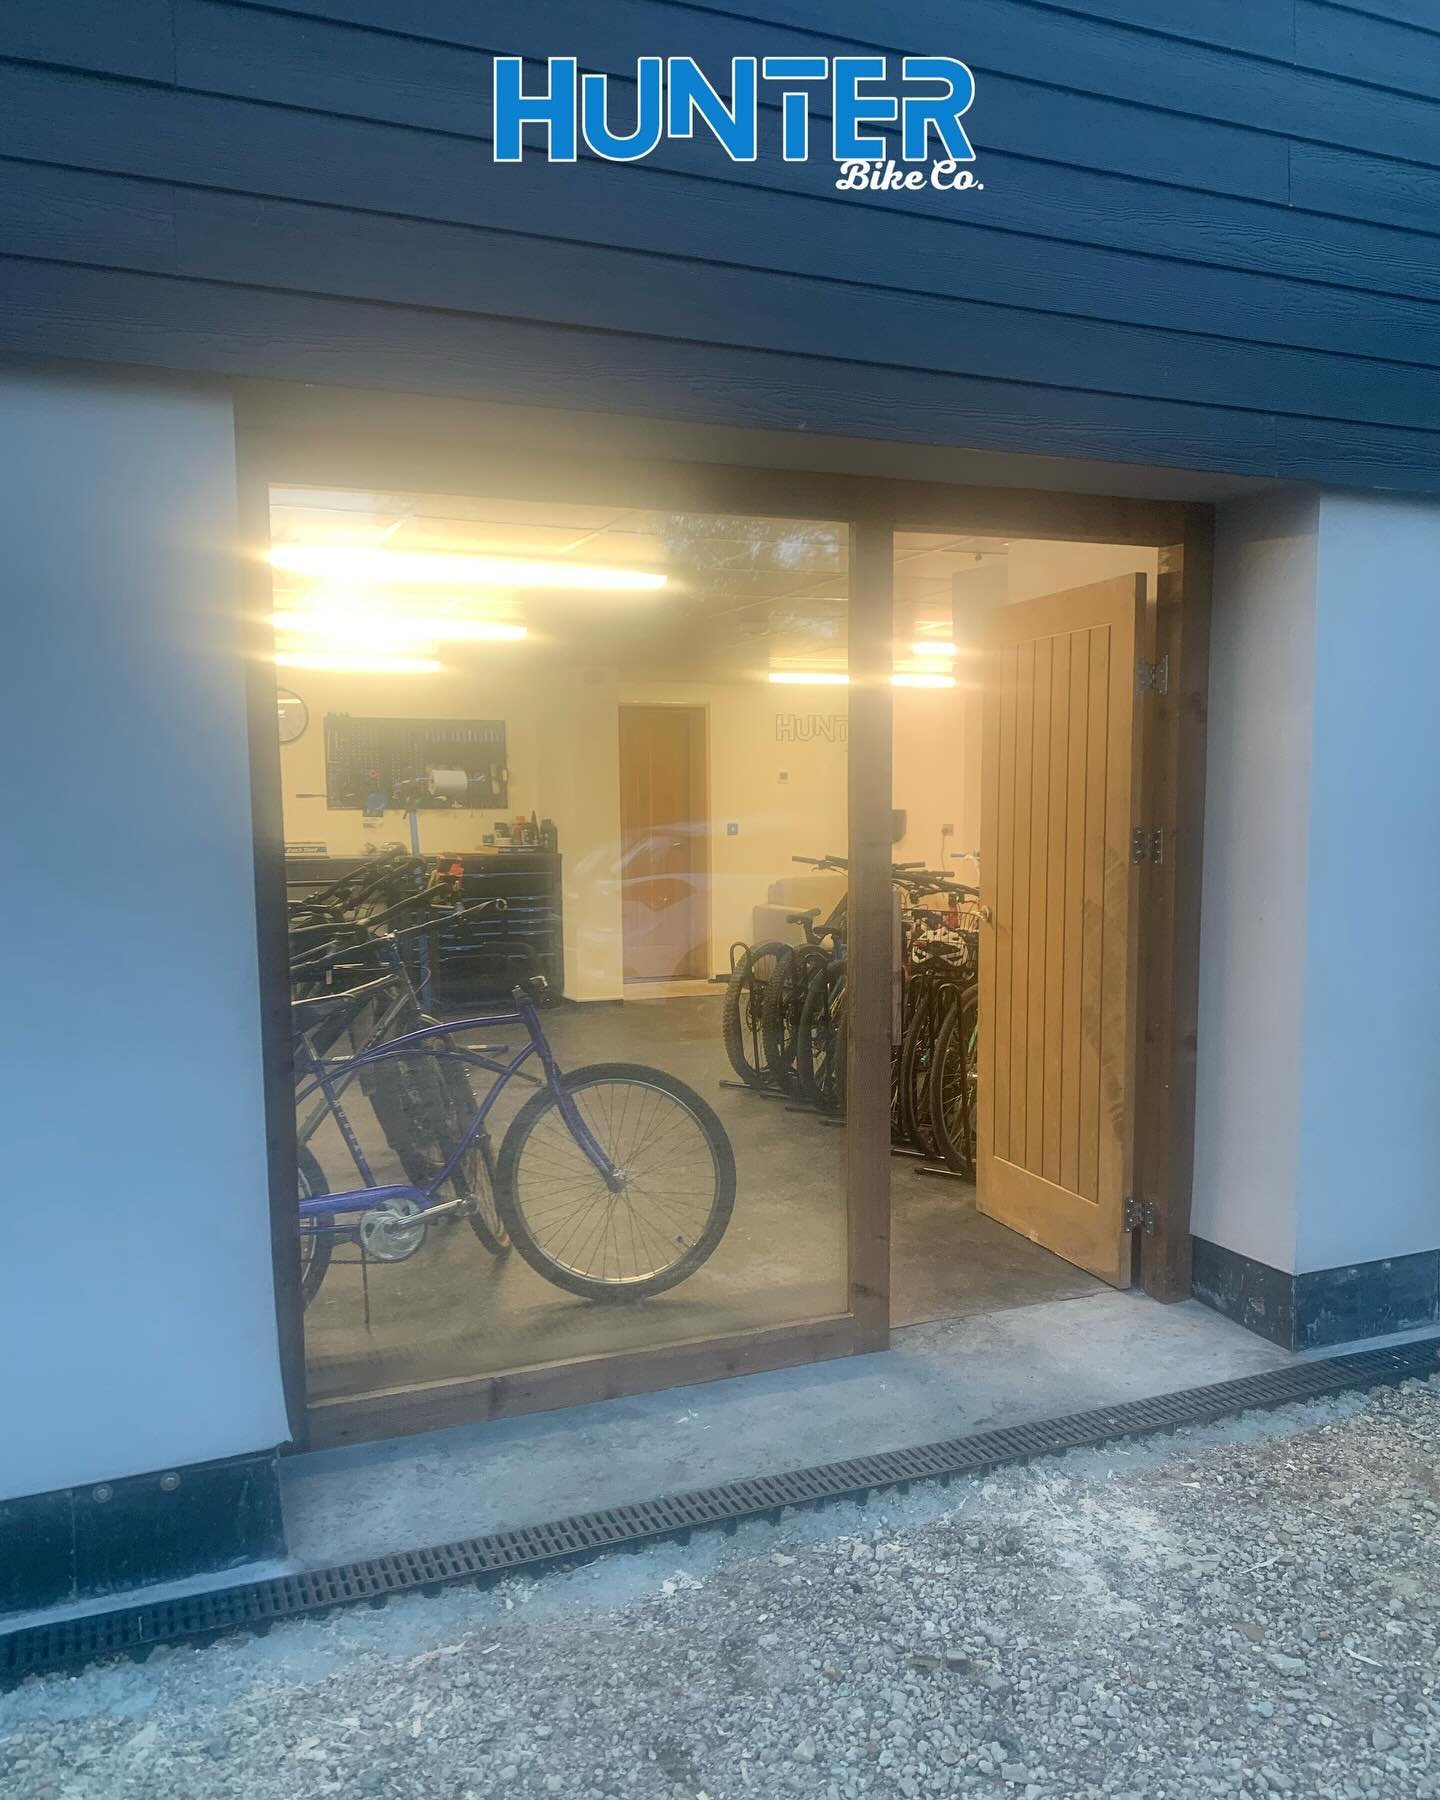 Did a thing today. It&rsquo;s not quite done, but I&rsquo;m looking forward to welcoming you through the new Hunter BikeCo front door 🙂
Thanks to @mr_nickyp for help(basically doing it all).